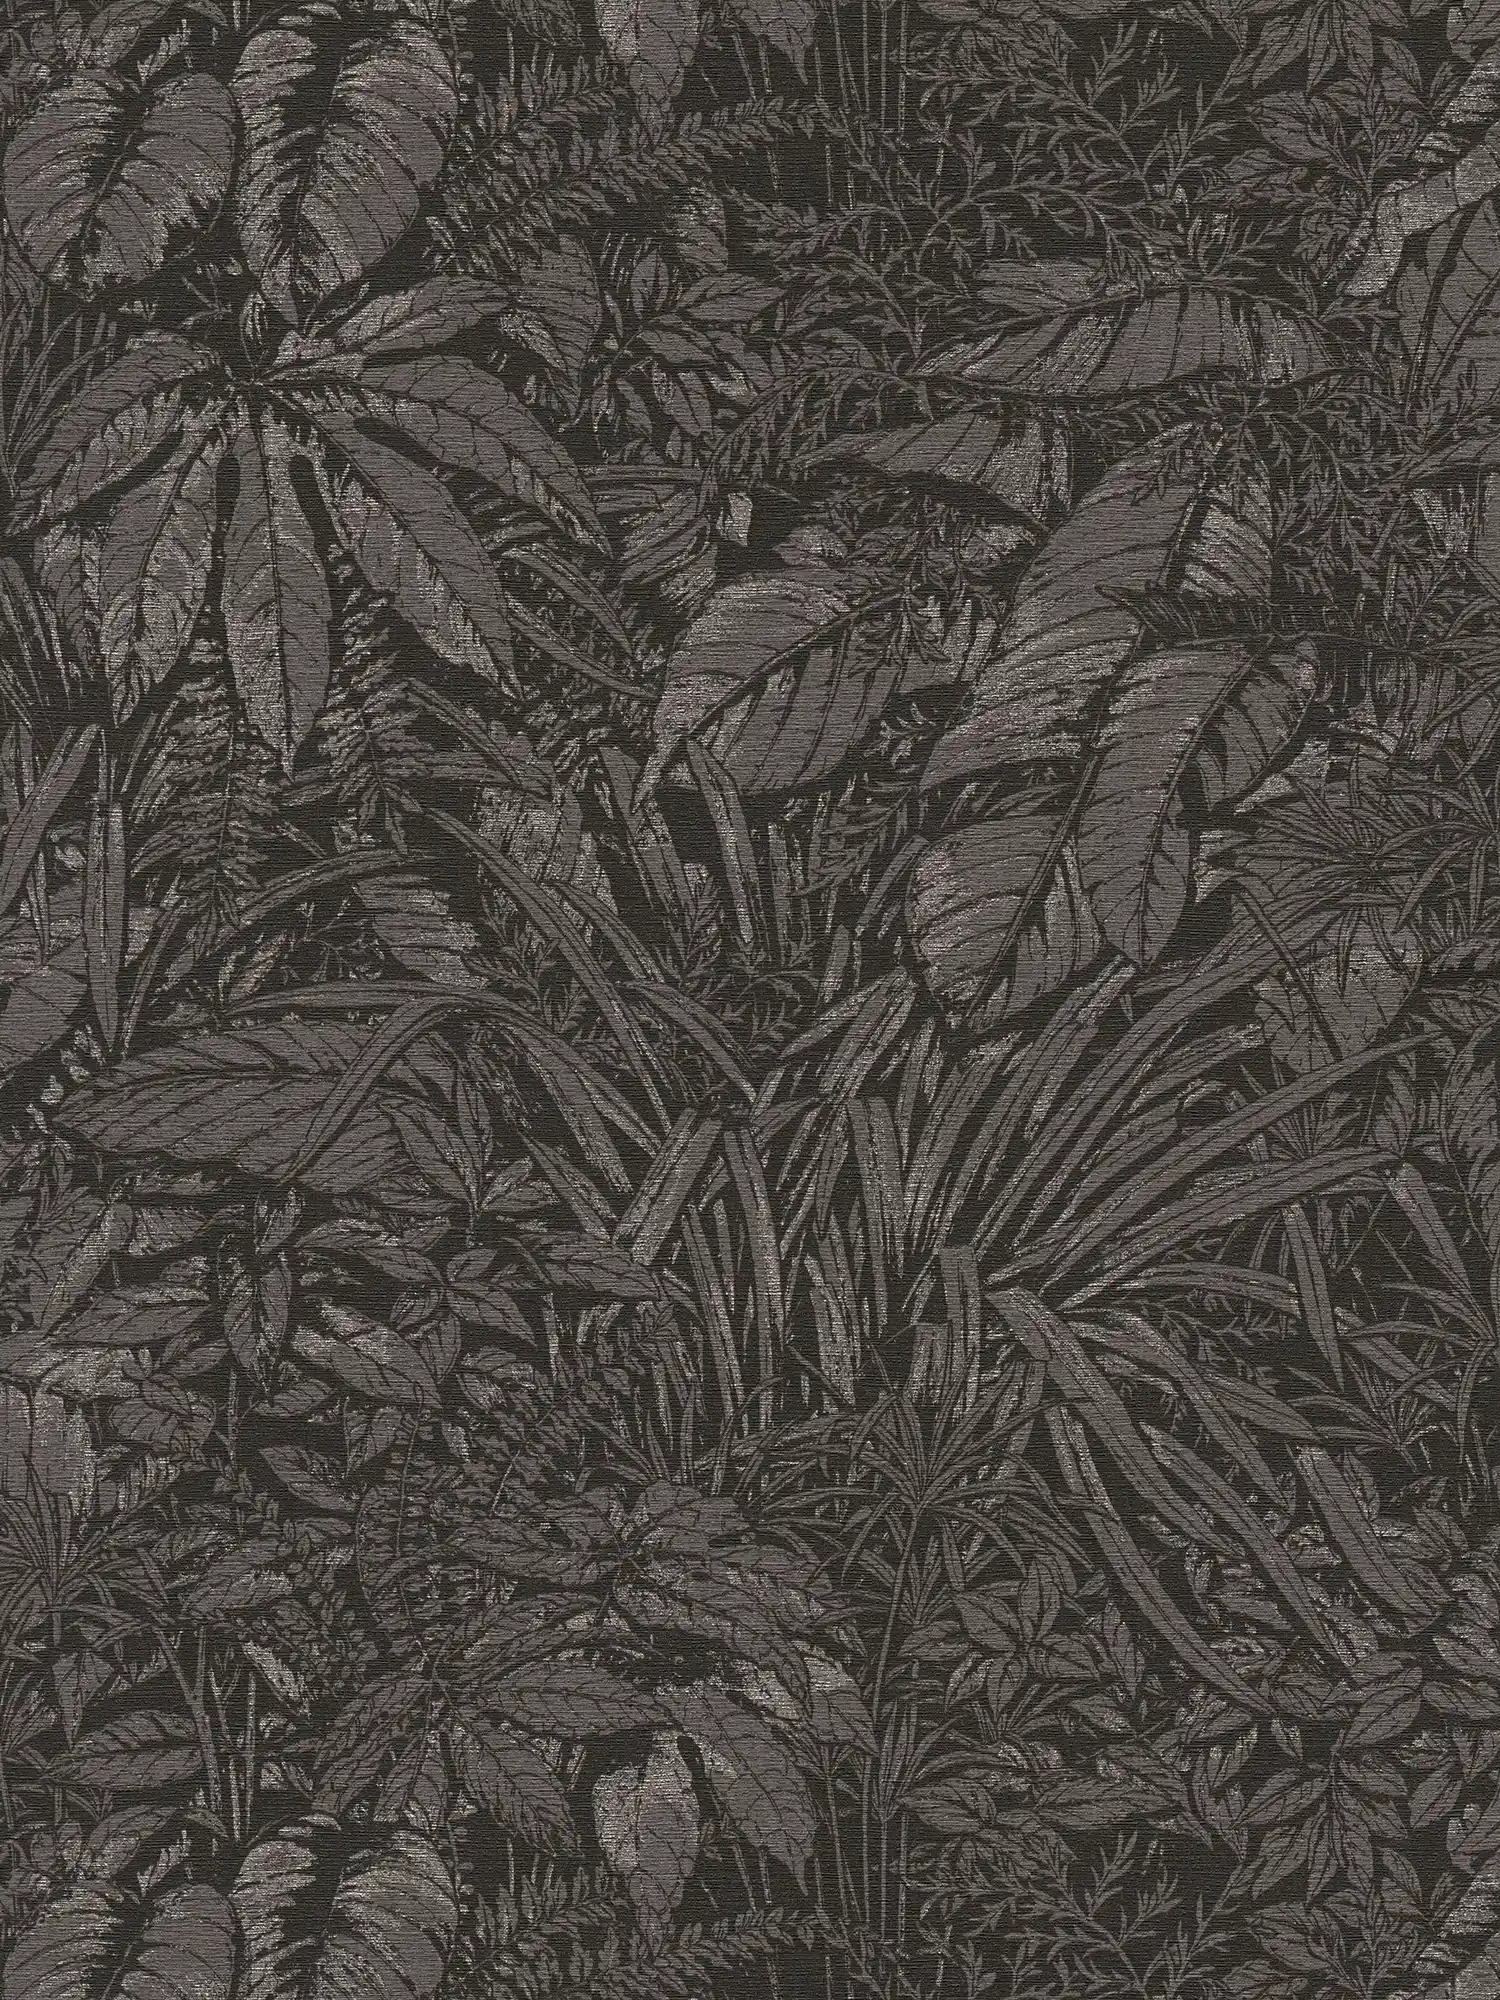 Floral non-woven wallpaper with jungle pattern - black, grey, silver
